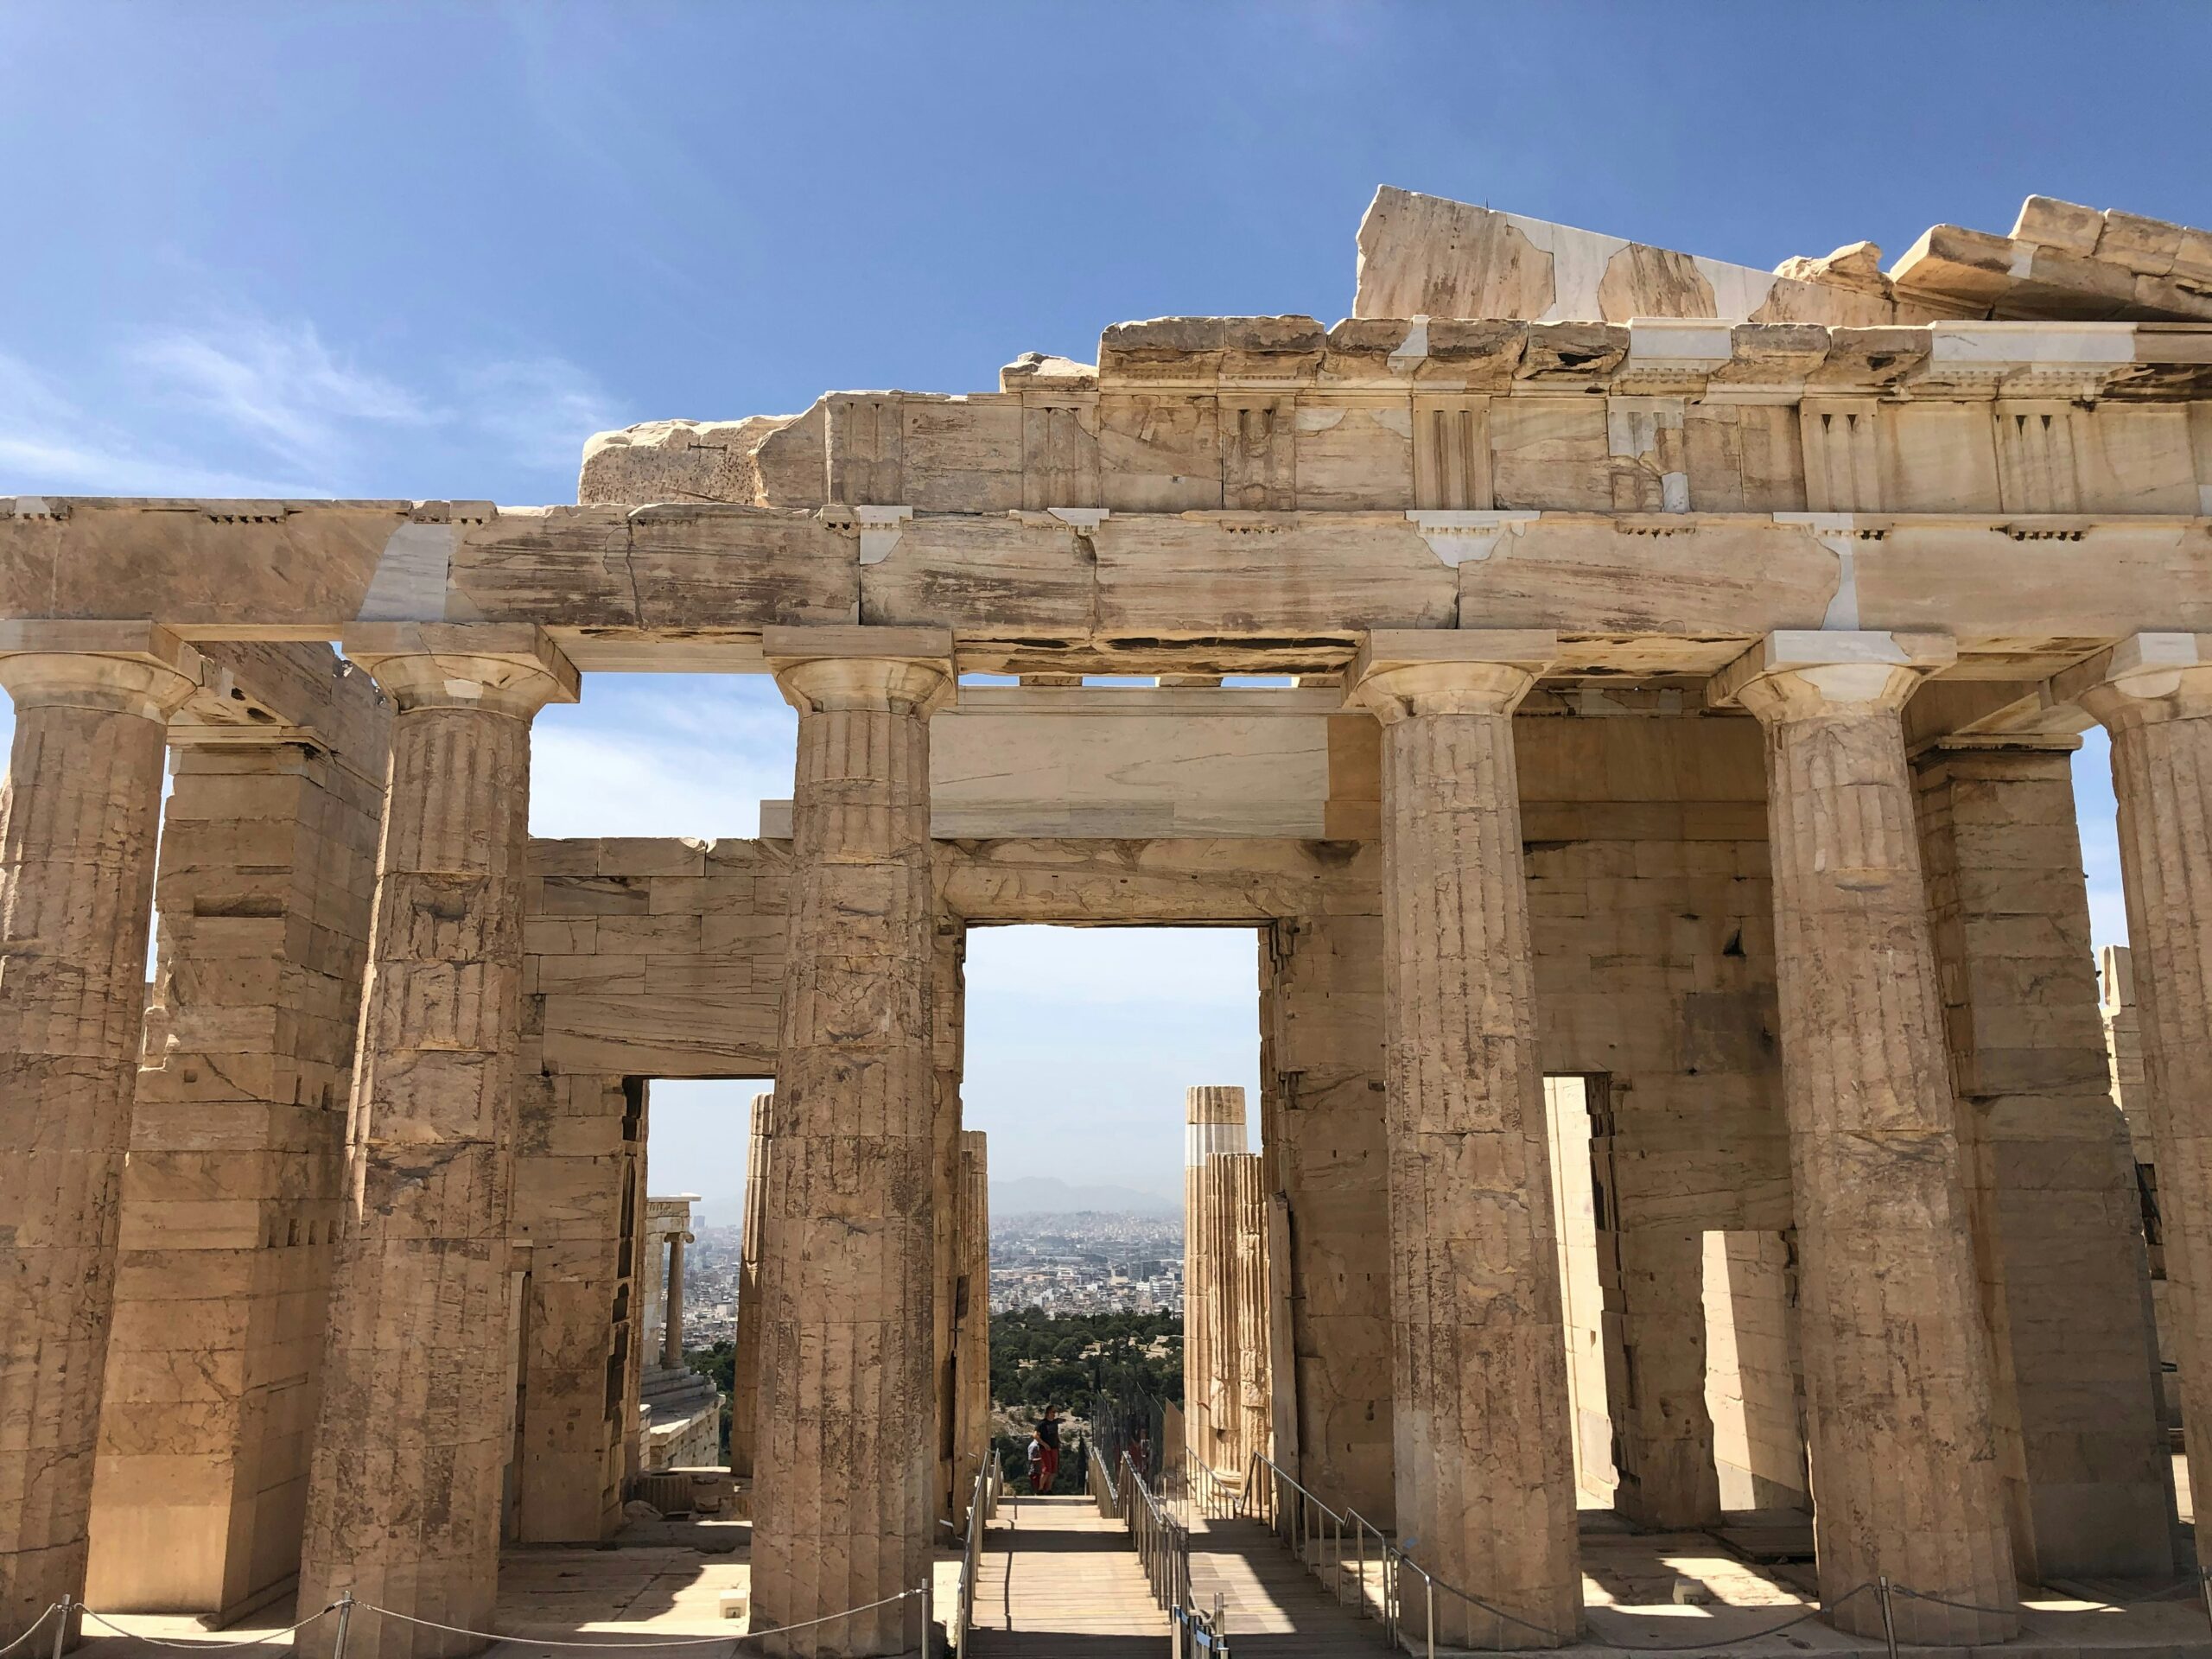 The historical sites of Greece are most comfortably enjoyed in fall. Check them out during the best time to visit Greece.
pictured: the Acropolis